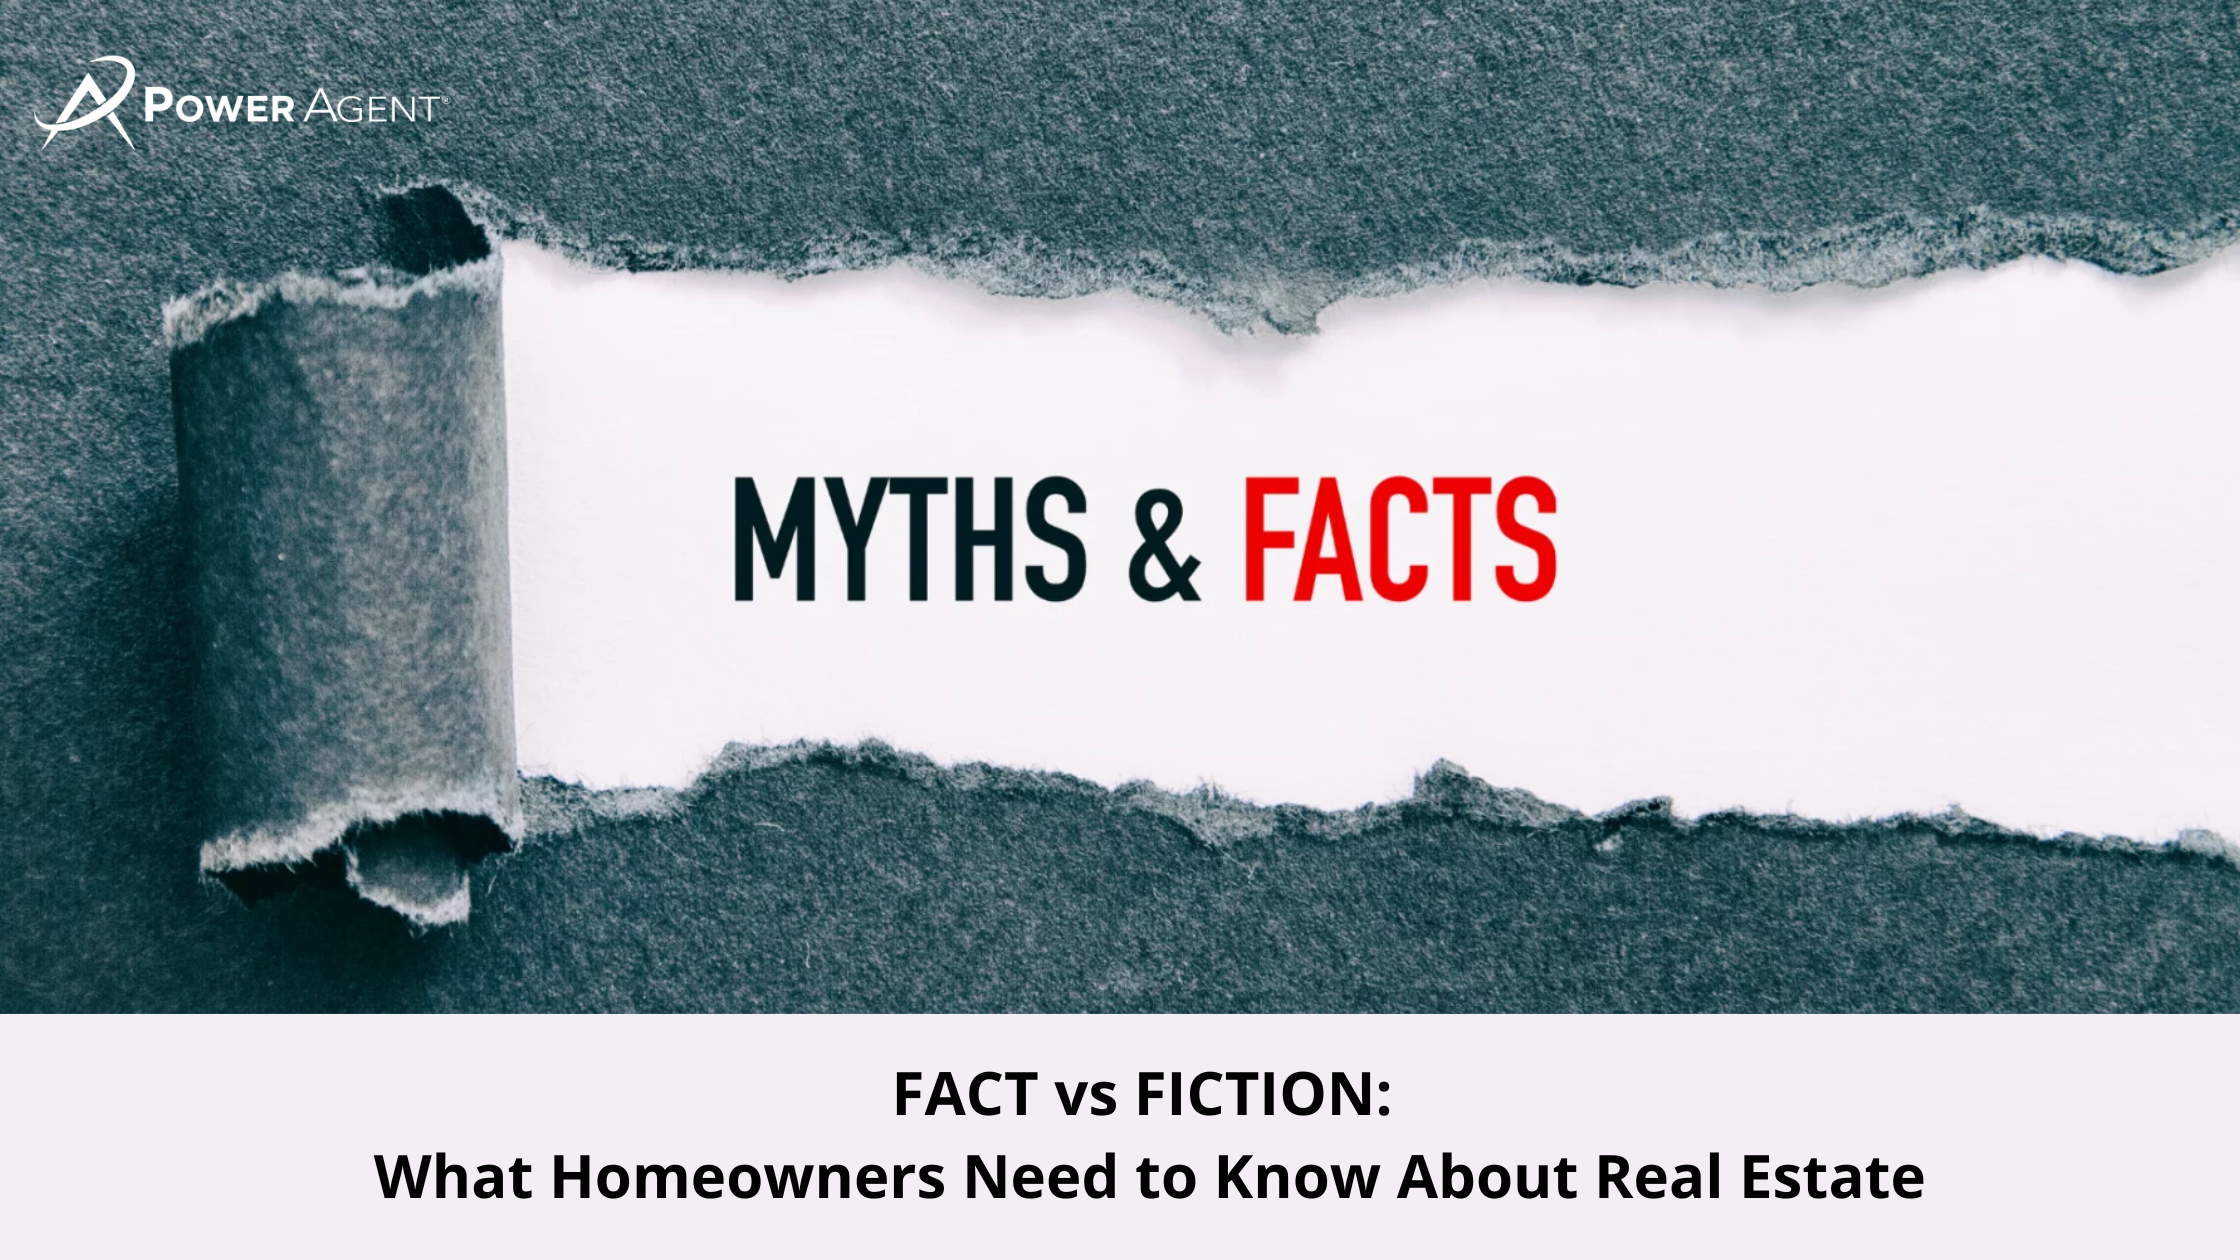 FACT vs FICTION: What Homeowners Need to Know About Real Estate